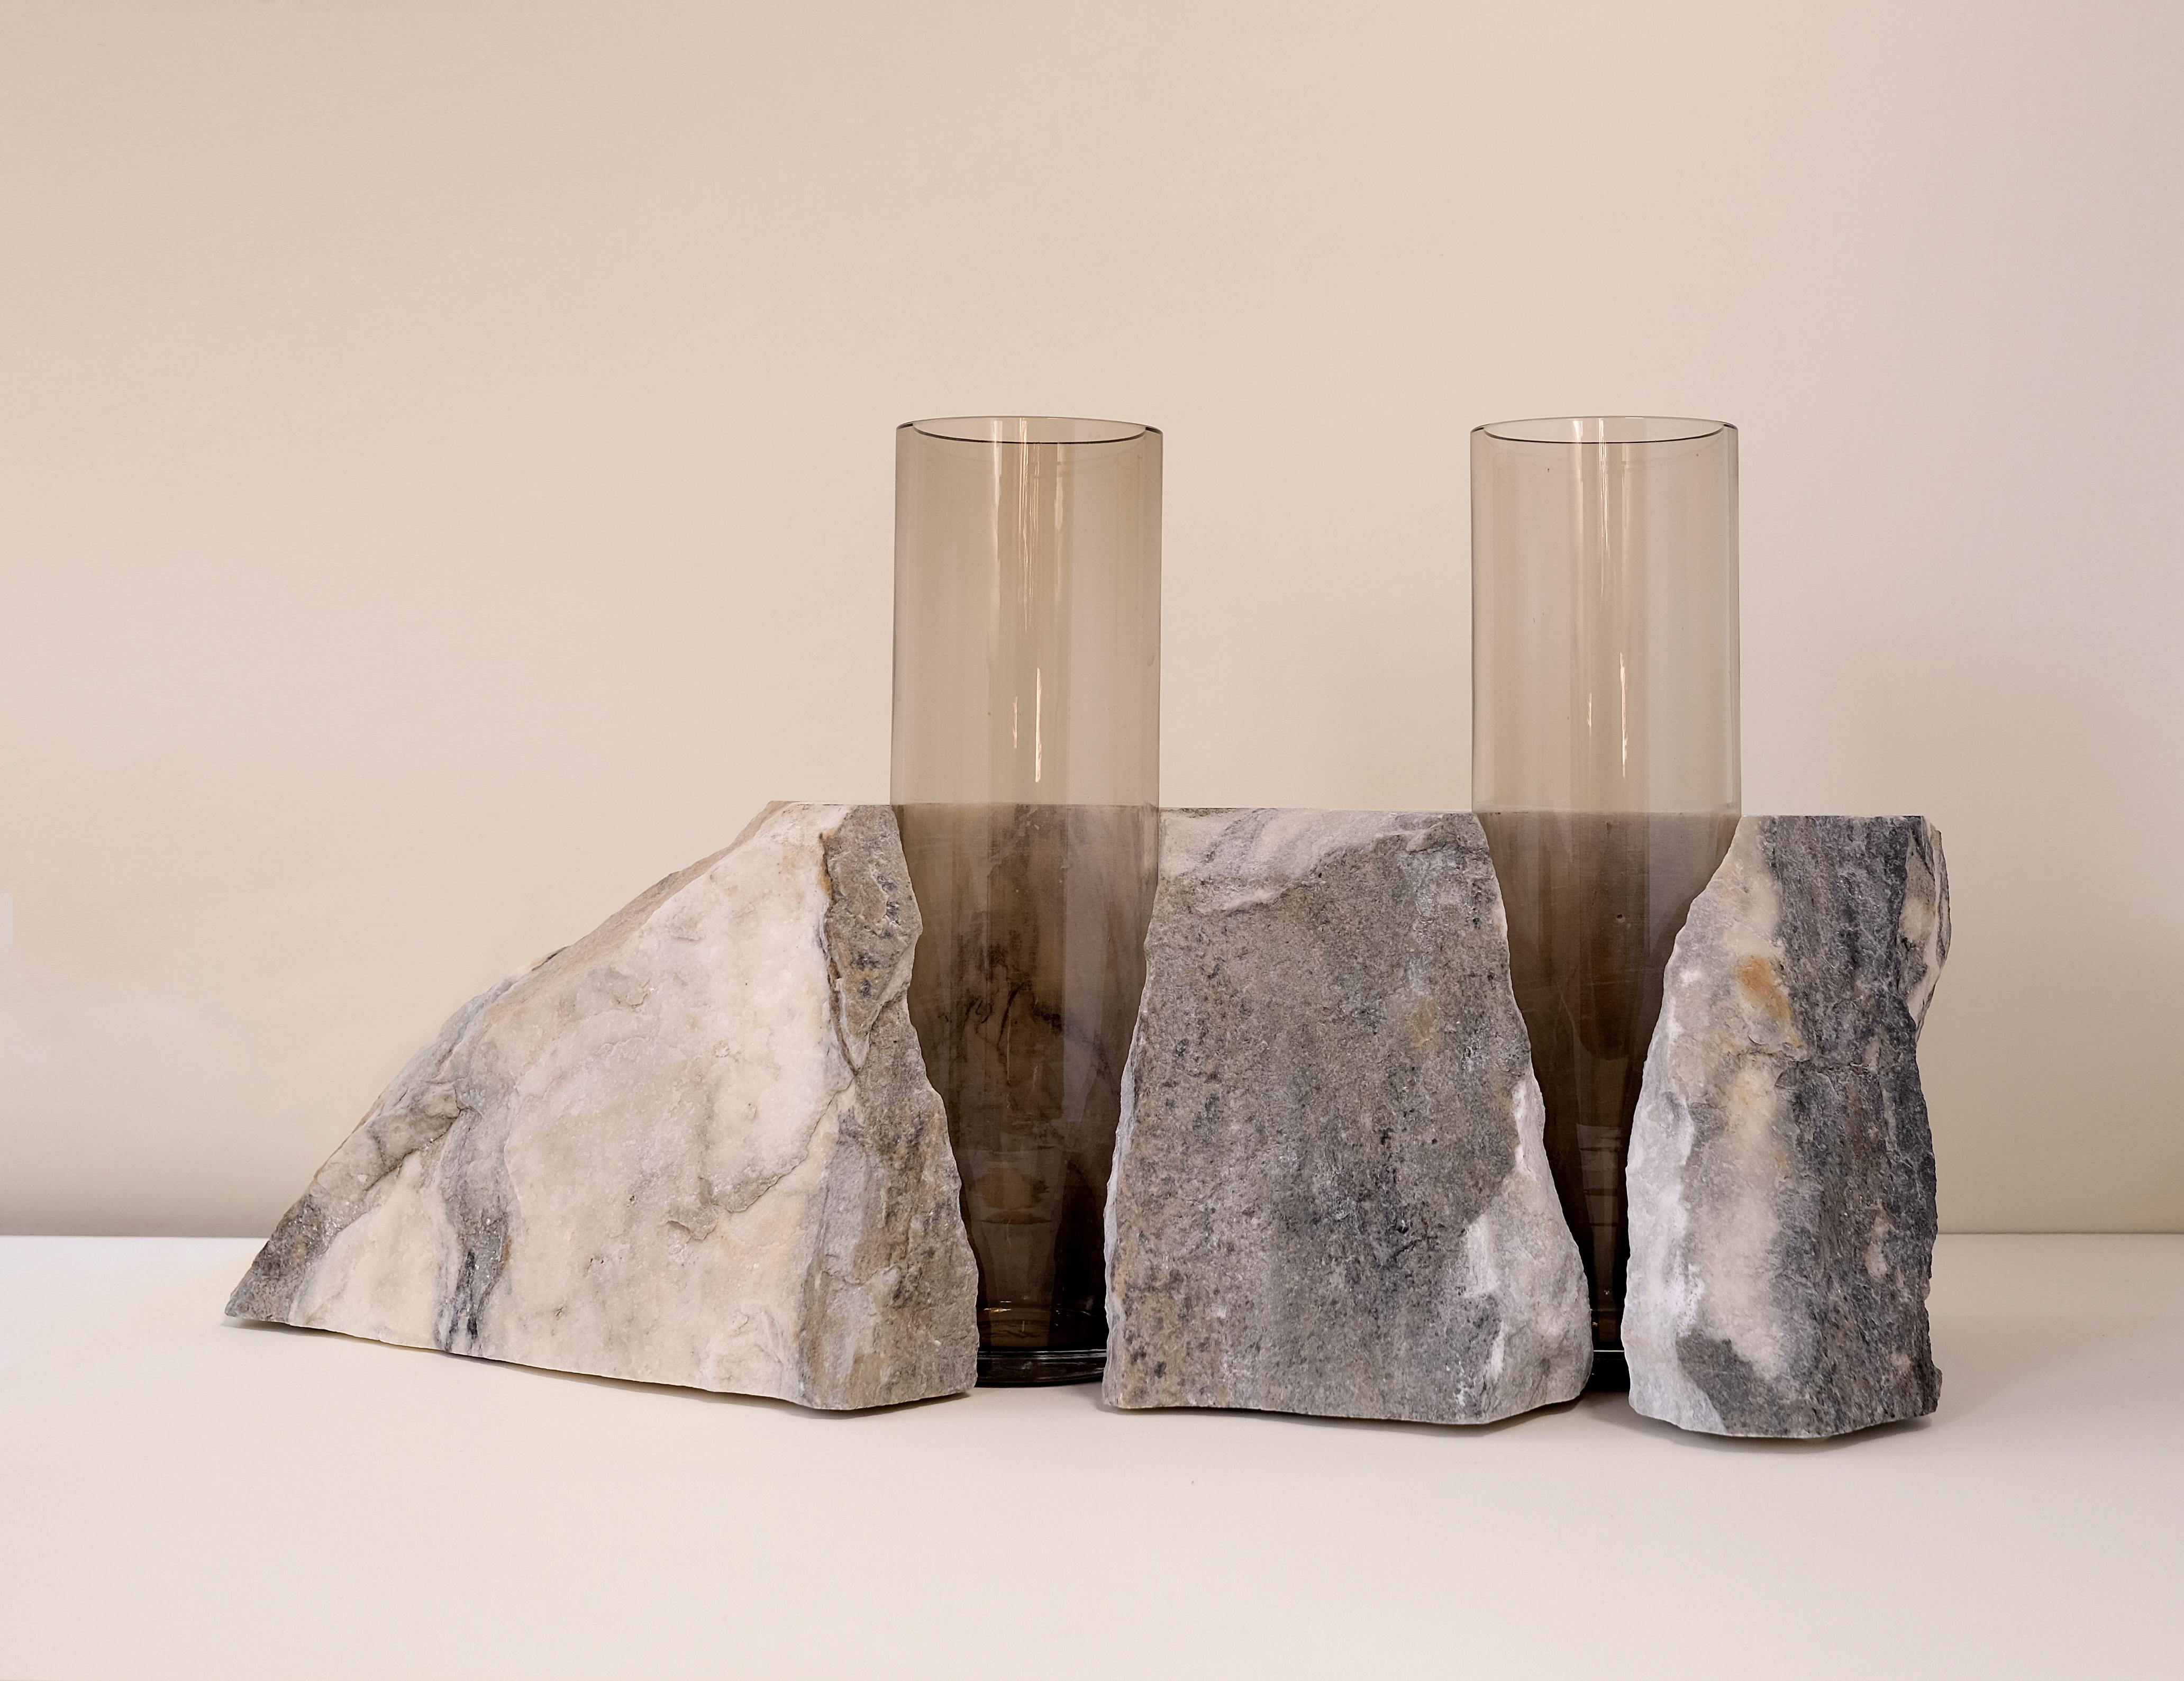 Drill vases

Part chaos and part control, drill vases are an exercise in
improvisation.

The origin of the project lies in Carrara, and the small fragments of
marble found discarded by quarries in the region. I began to collect
these